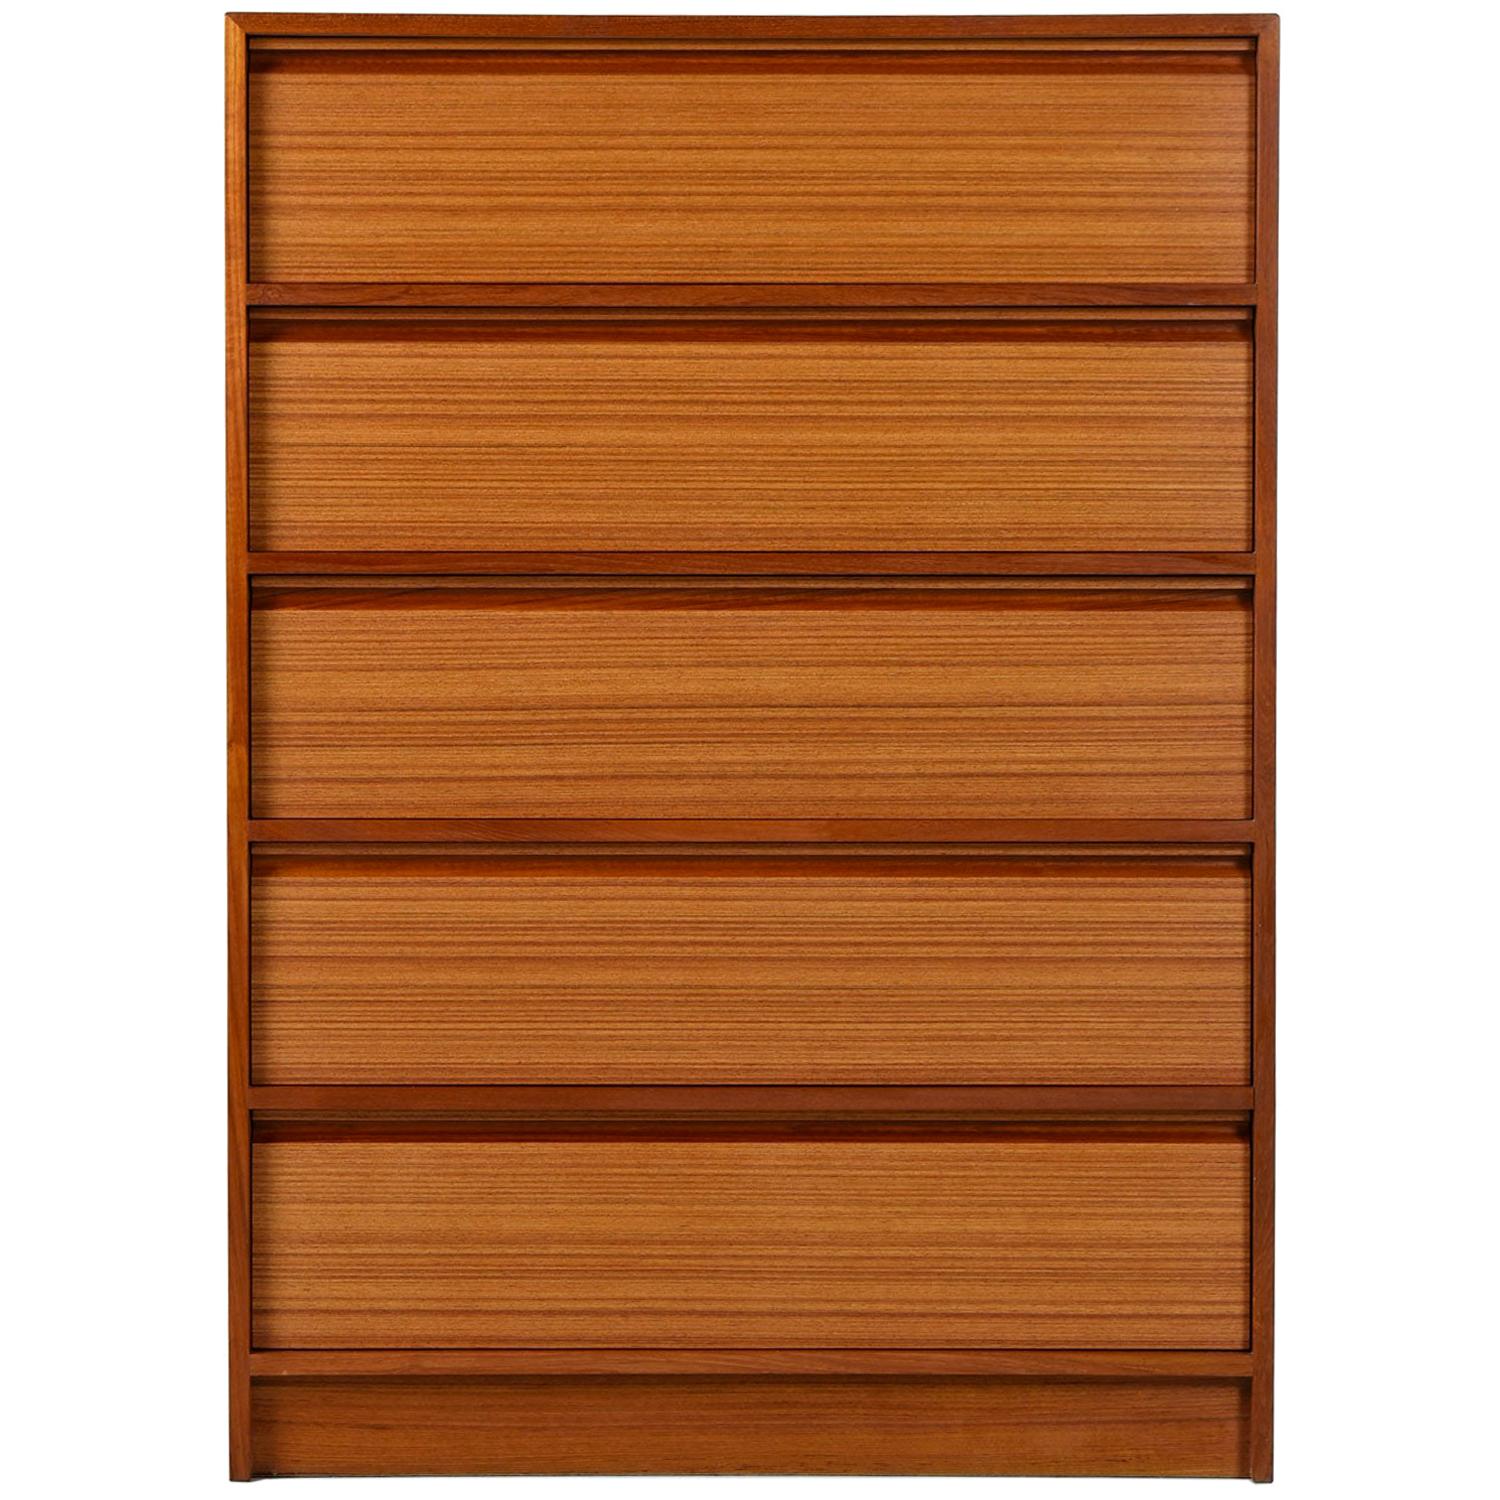 Expertly crafted midcentury Scandinavian Modern Danish teak highboy dresser. This chest of drawers is an exemplary specimen of Danish cabinet making. Tightly dovetailed drawers, beautiful teak wood and easy gliding drawers are hallmarks of the